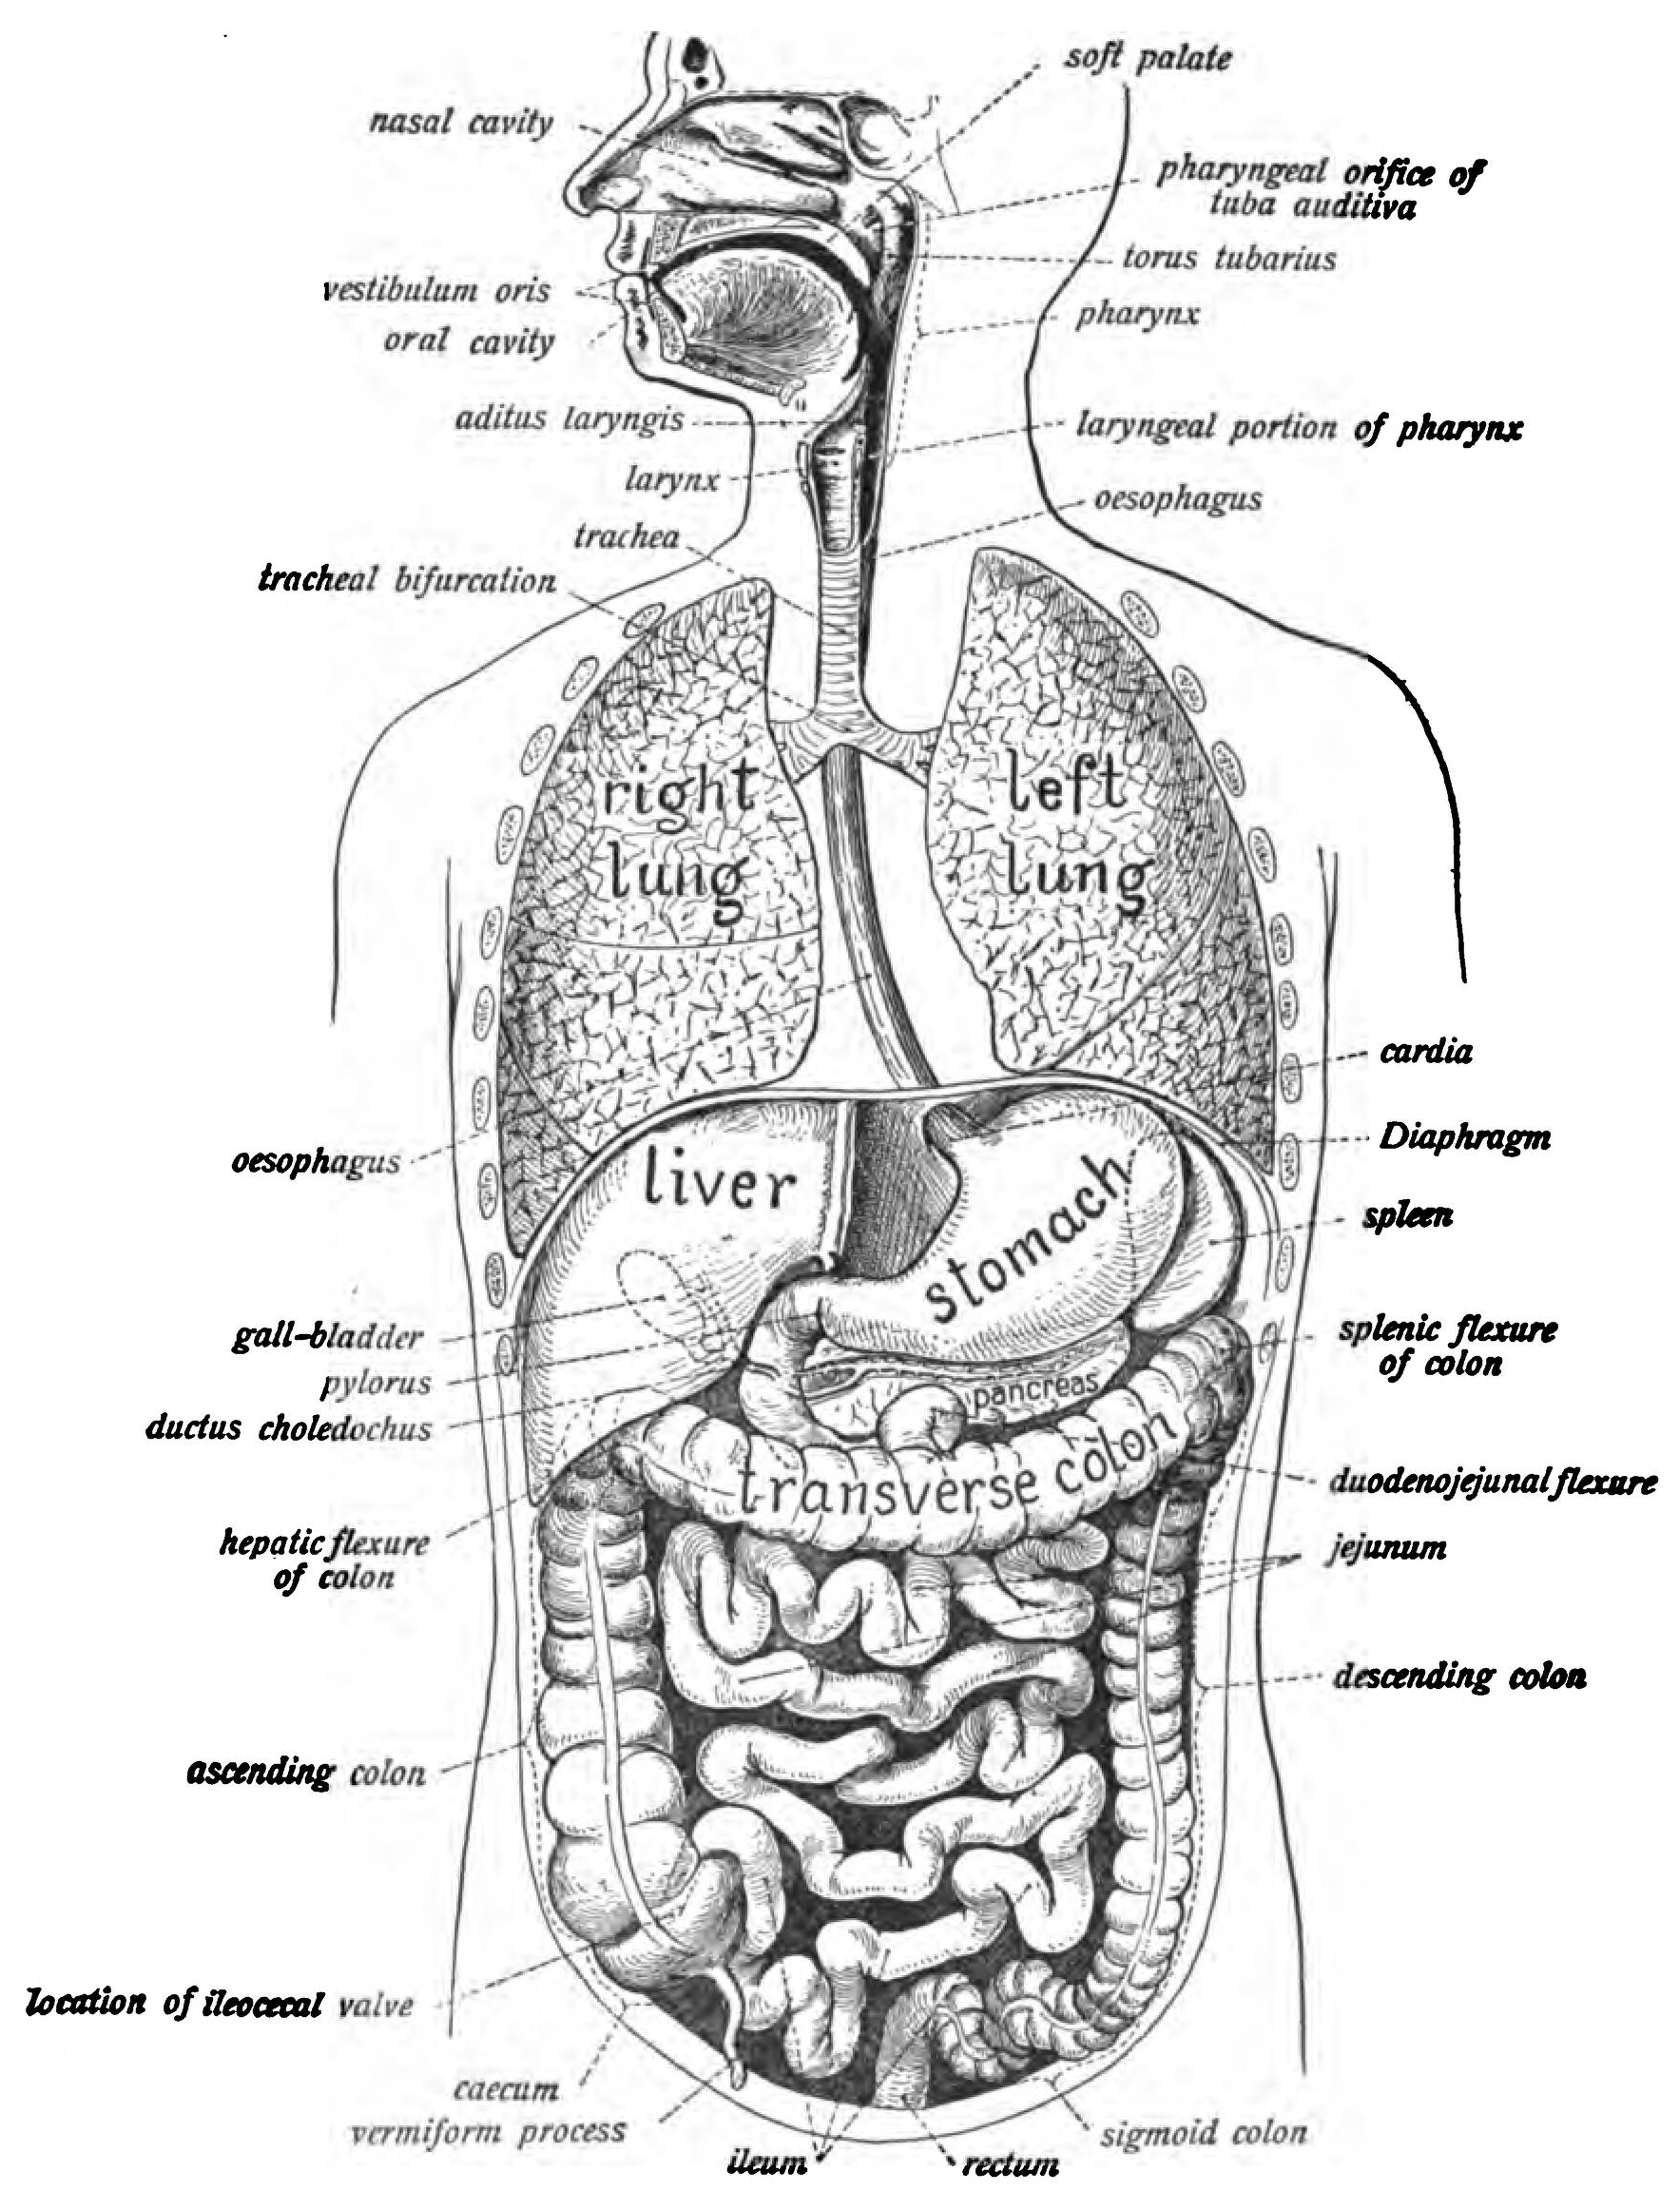 Diagram Of The Digestive System - exatin.info